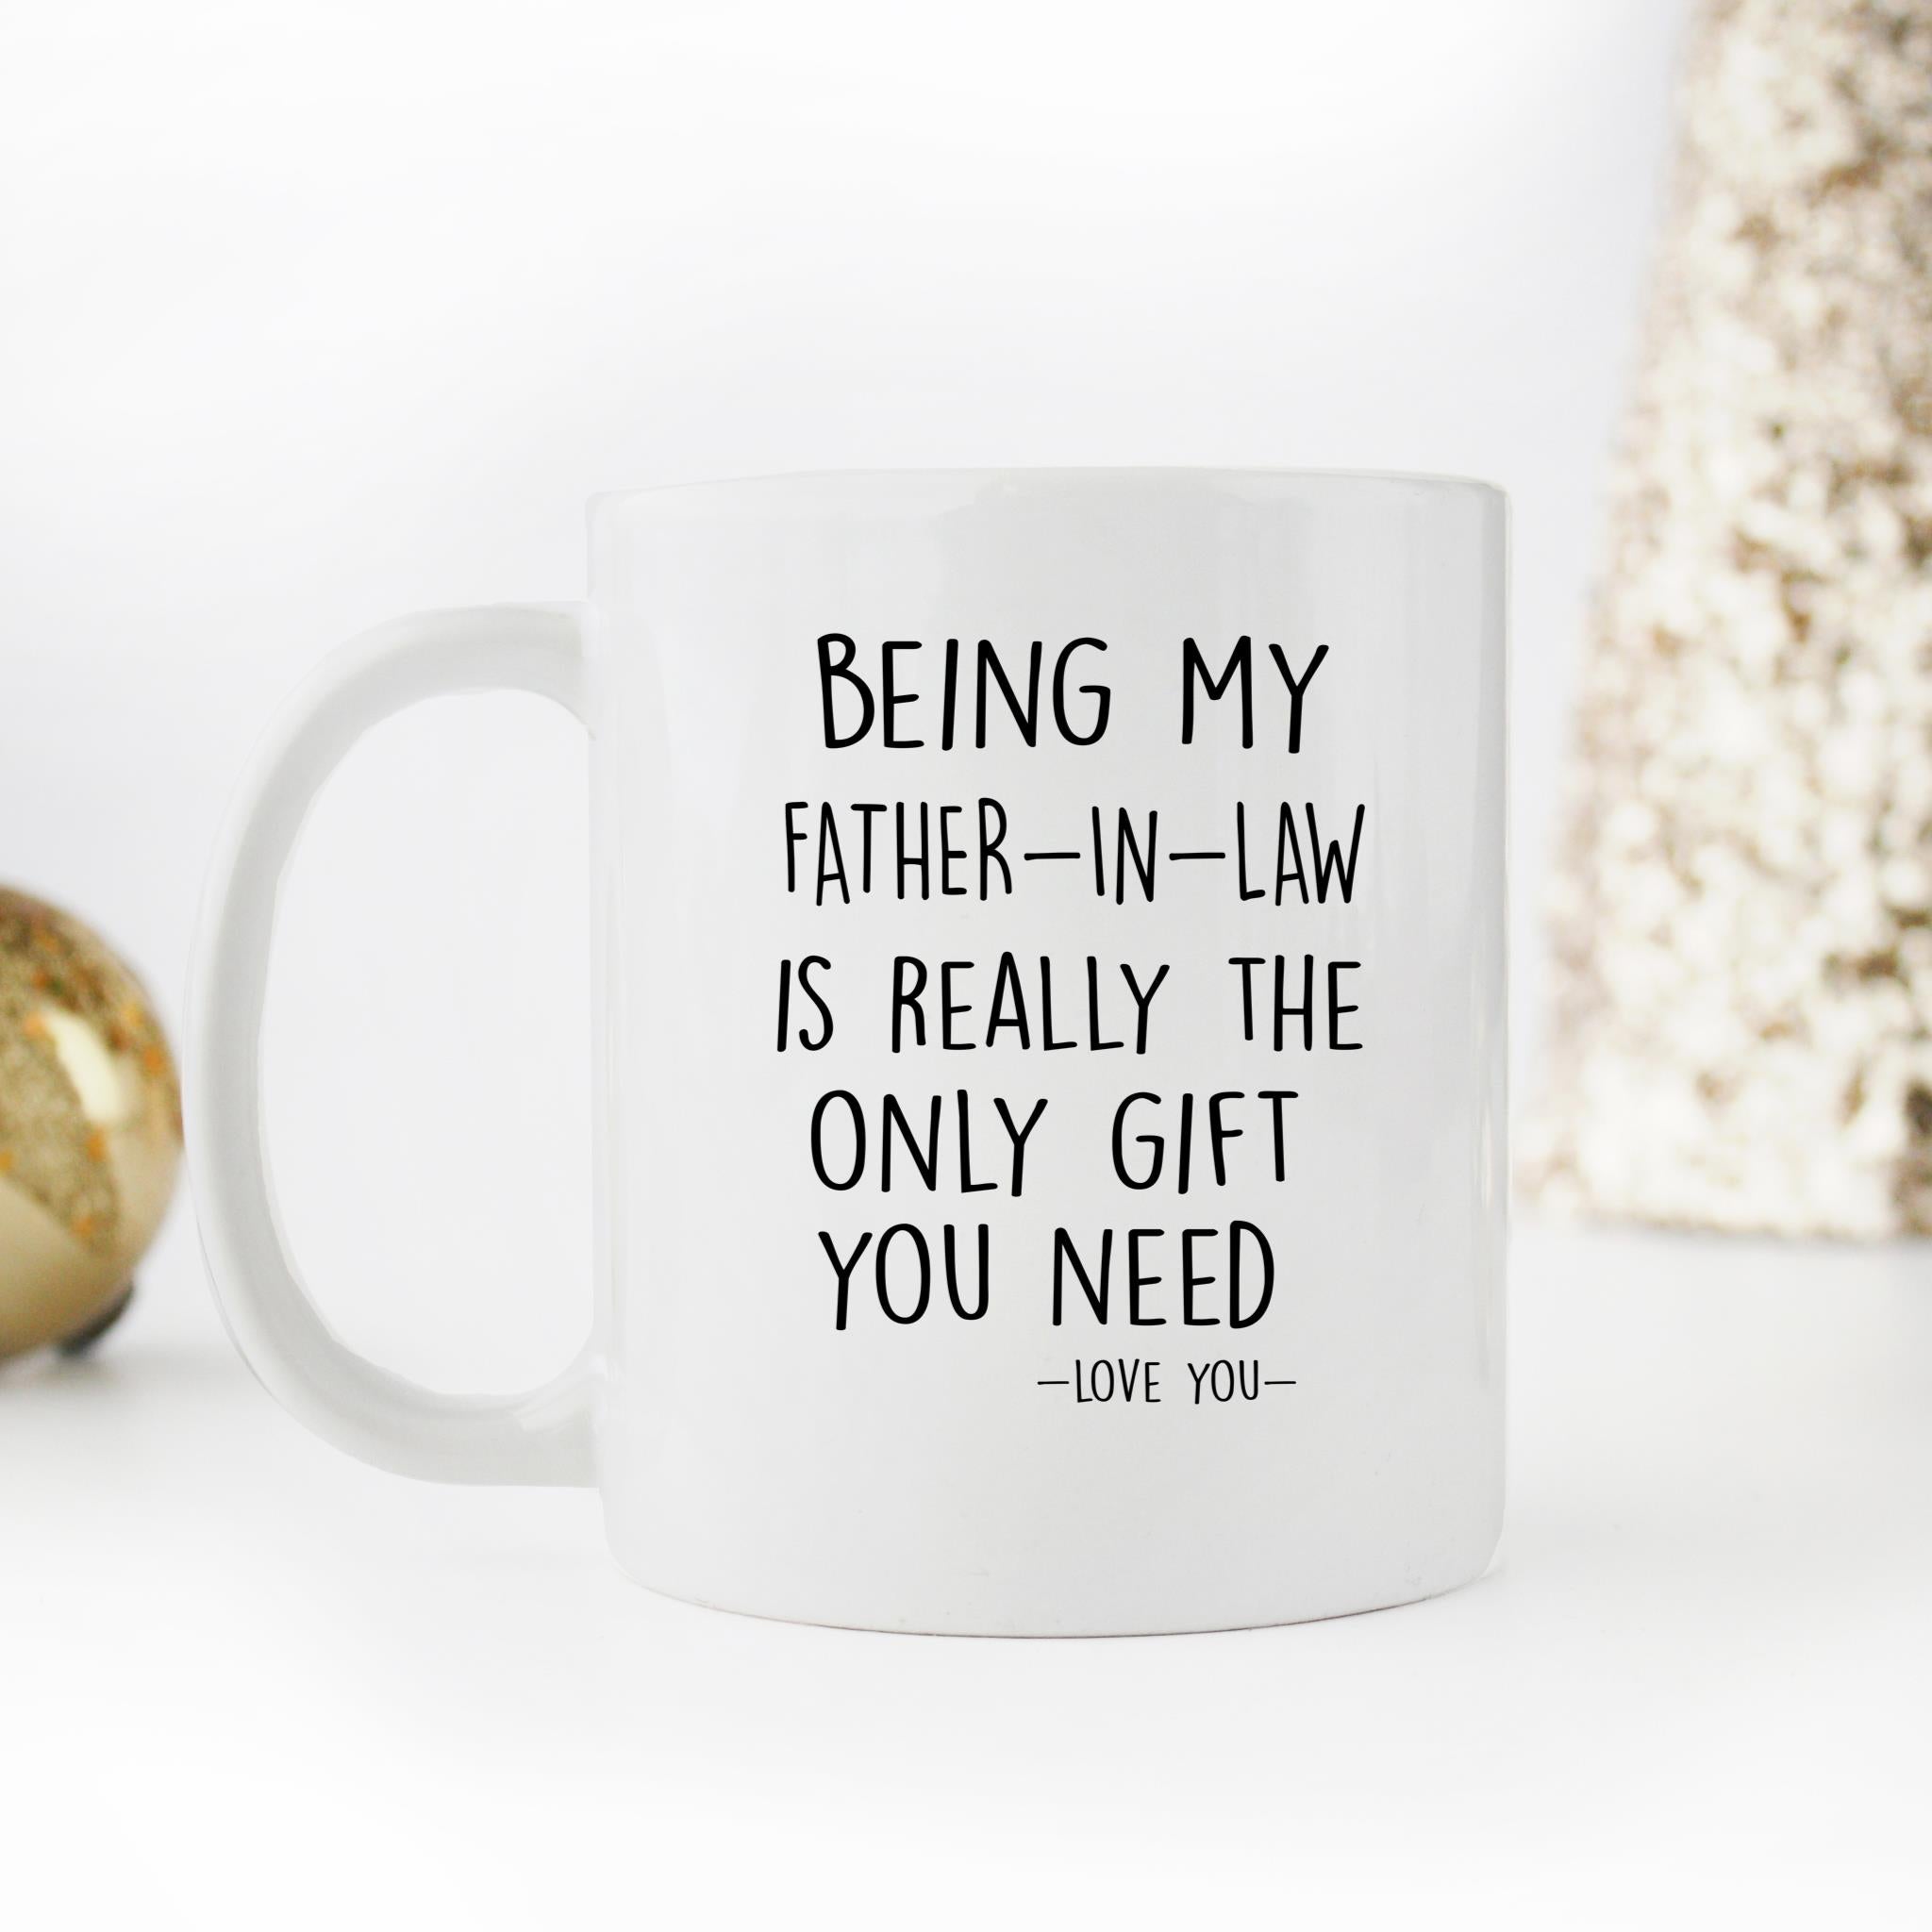 Skitongifts Funny Ceramic Novelty Coffee Mug Being My Father-in-law Is Really The Only You Need  Love You Father-in-law Funny For Father's Day aTreED8